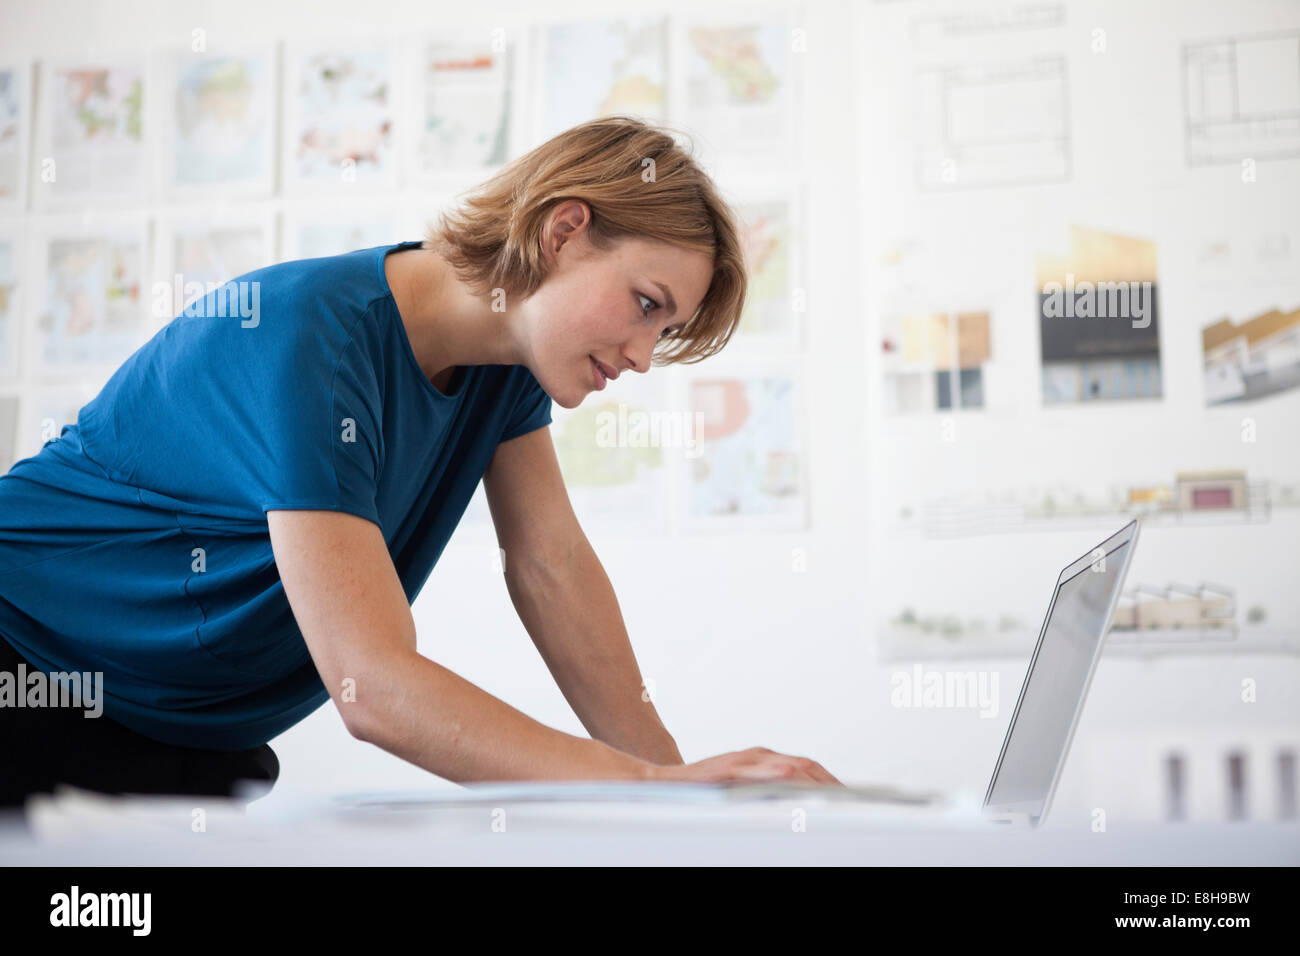 Portrait of young woman using laptop in a creative office Stock Photo